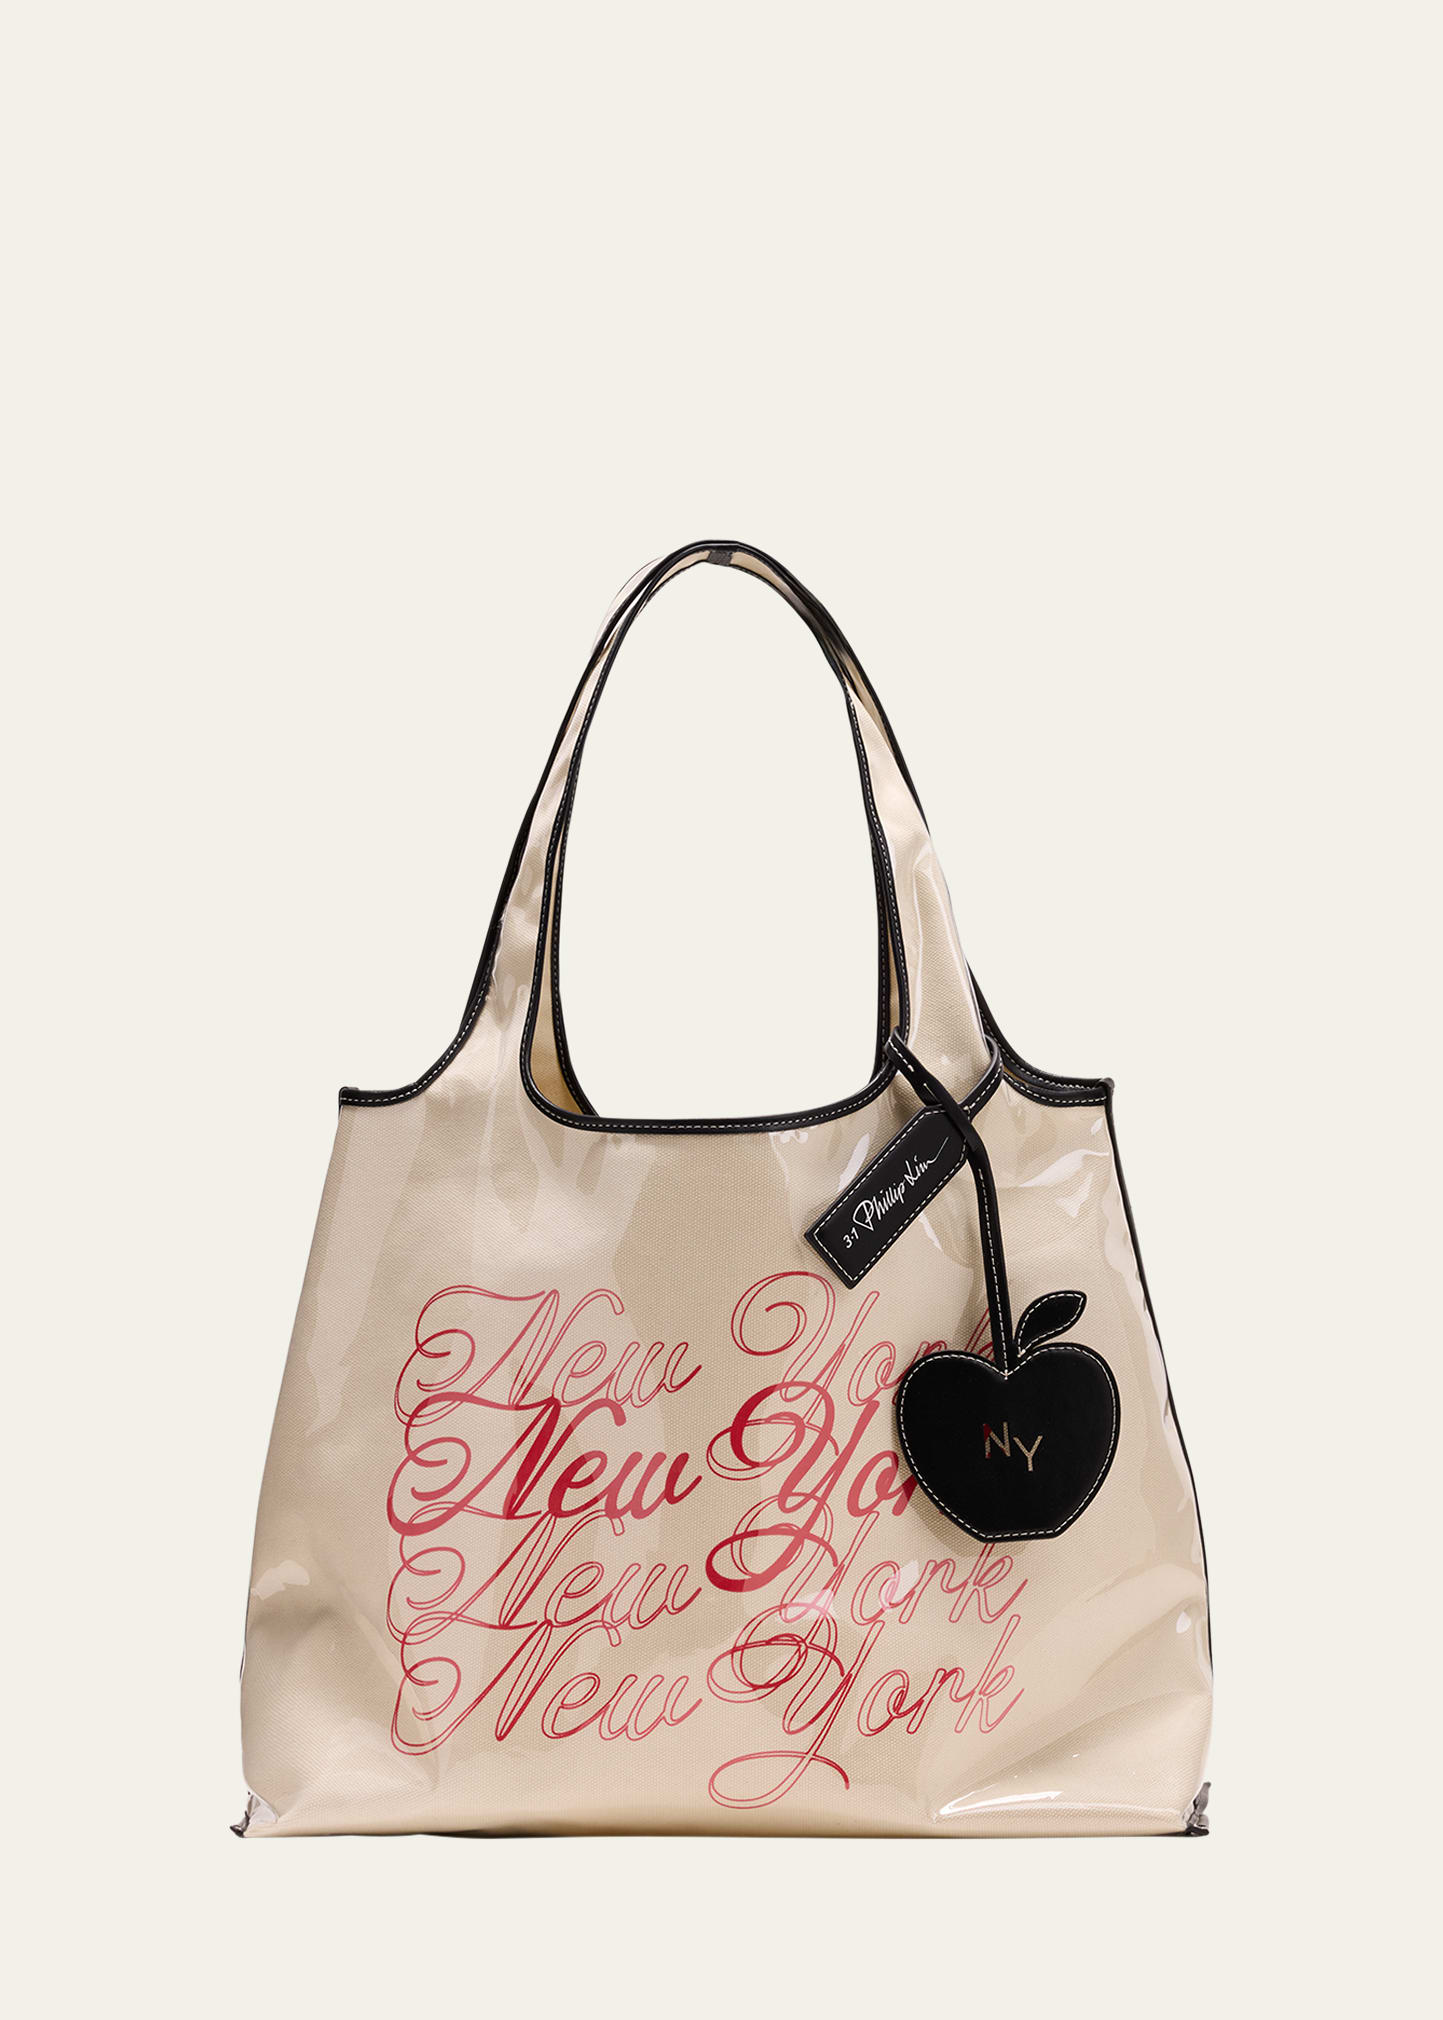 We Are New York Market Tote Bag